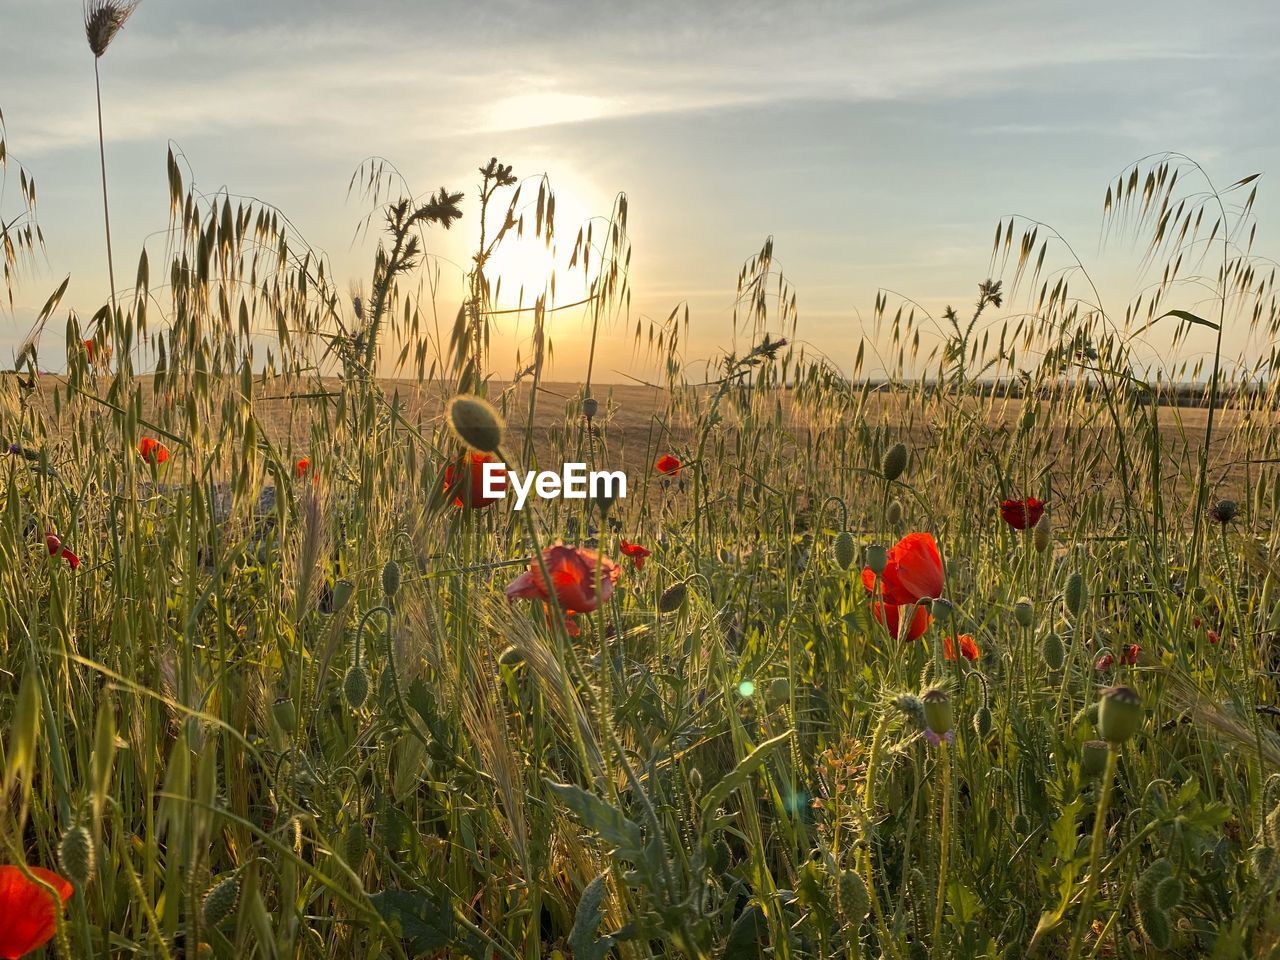 plant, sky, land, field, landscape, nature, beauty in nature, environment, flower, cloud, red, sunset, growth, flowering plant, rural scene, poppy, agriculture, cereal plant, tranquility, scenics - nature, crop, grass, no people, freshness, prairie, sunlight, grassland, sun, tranquil scene, non-urban scene, summer, multi colored, meadow, outdoors, barley, food, horizon, wildflower, idyllic, plain, horizon over land, urban skyline, day, close-up, backgrounds, natural environment, twilight, yellow, gold, tree, rural area, corn, food and drink, fragility, farm, dramatic sky, dusk, vibrant color, springtime, abundance, green, plant stem